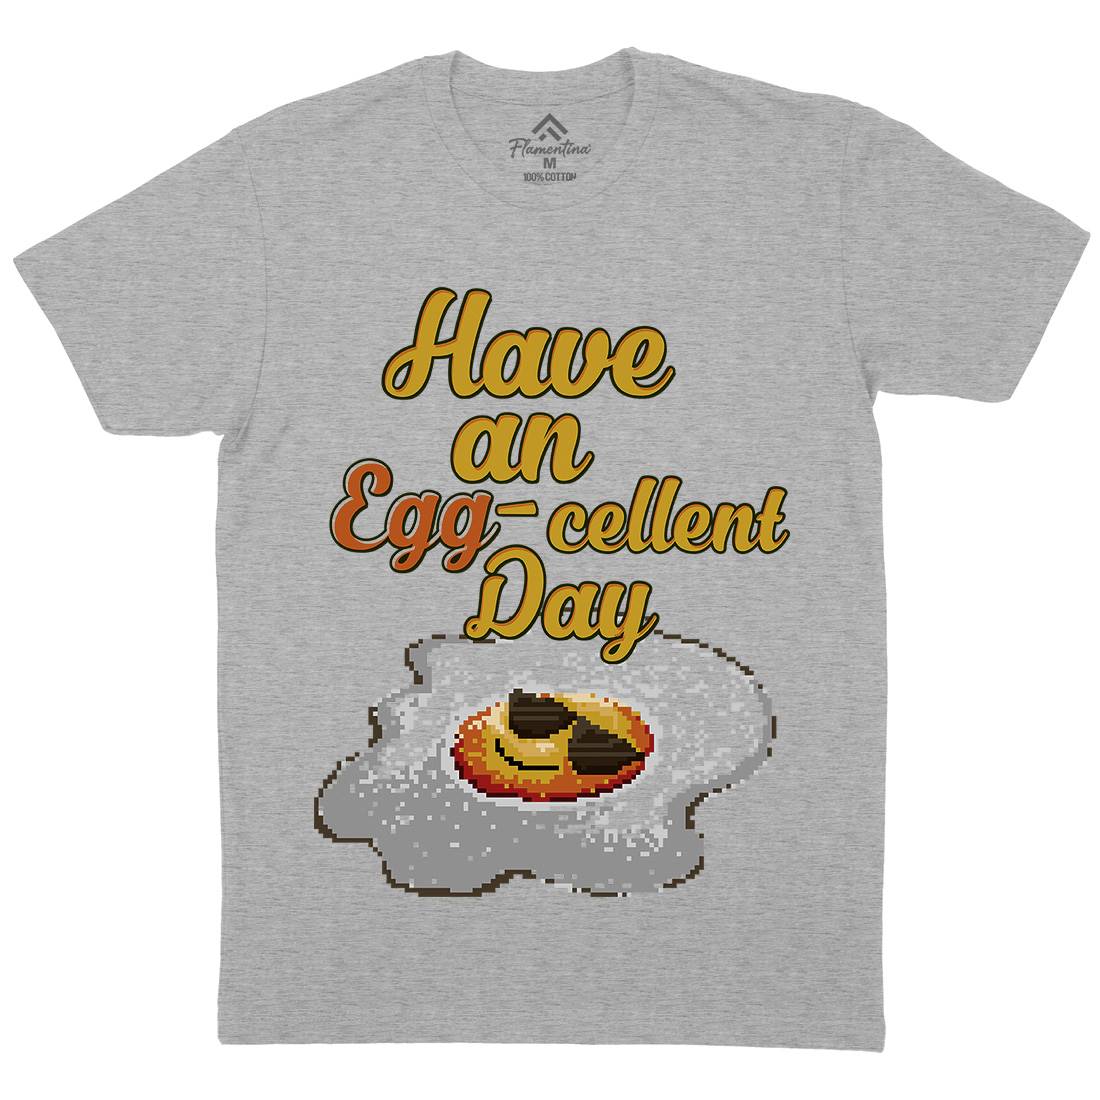 Have An Eggcellent Day Mens Crew Neck T-Shirt Food B911